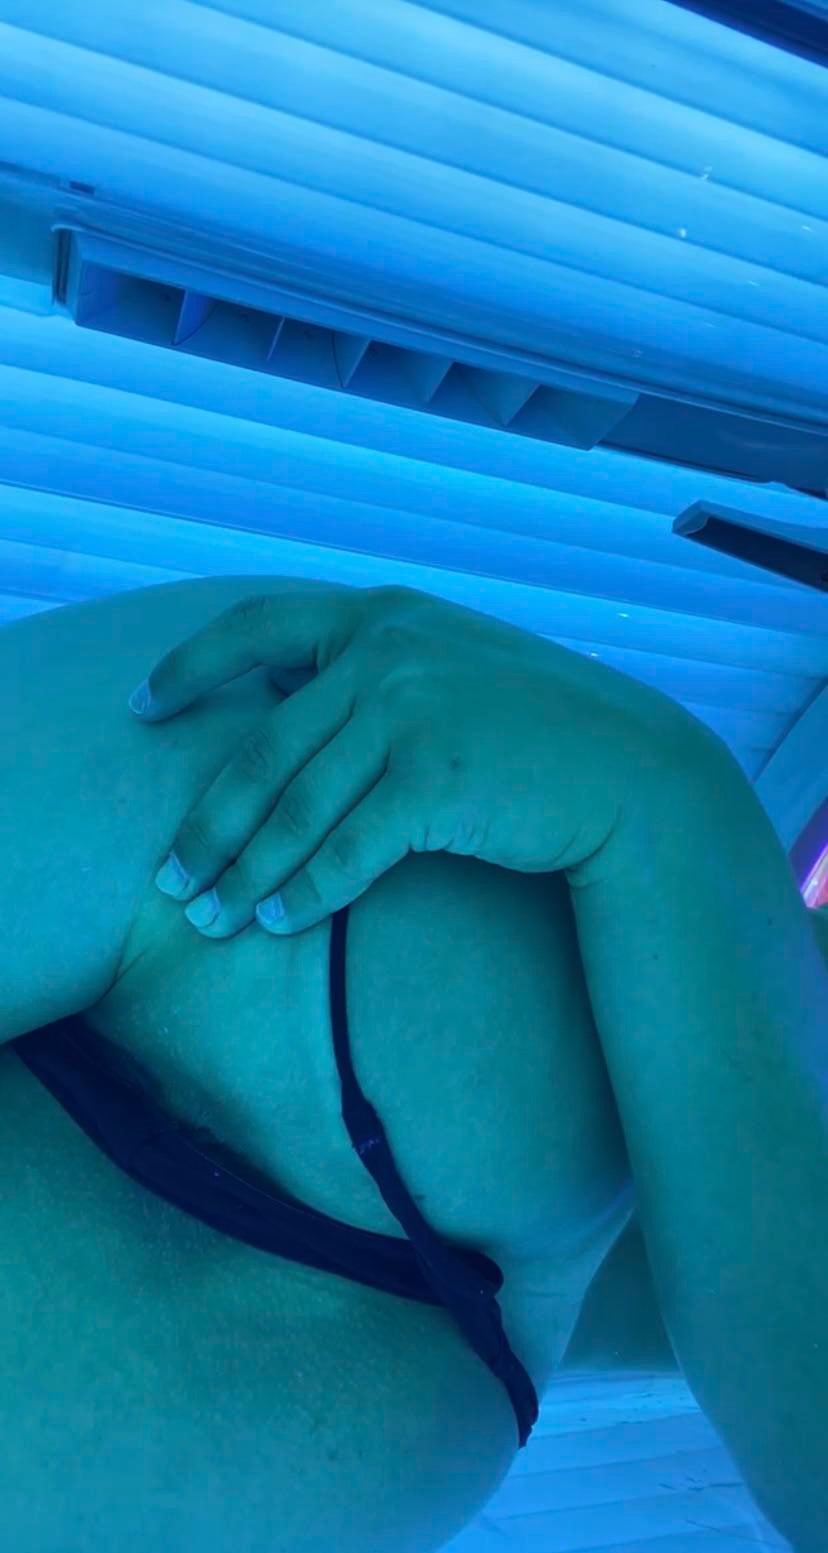 tanning is fun Thick White Girls